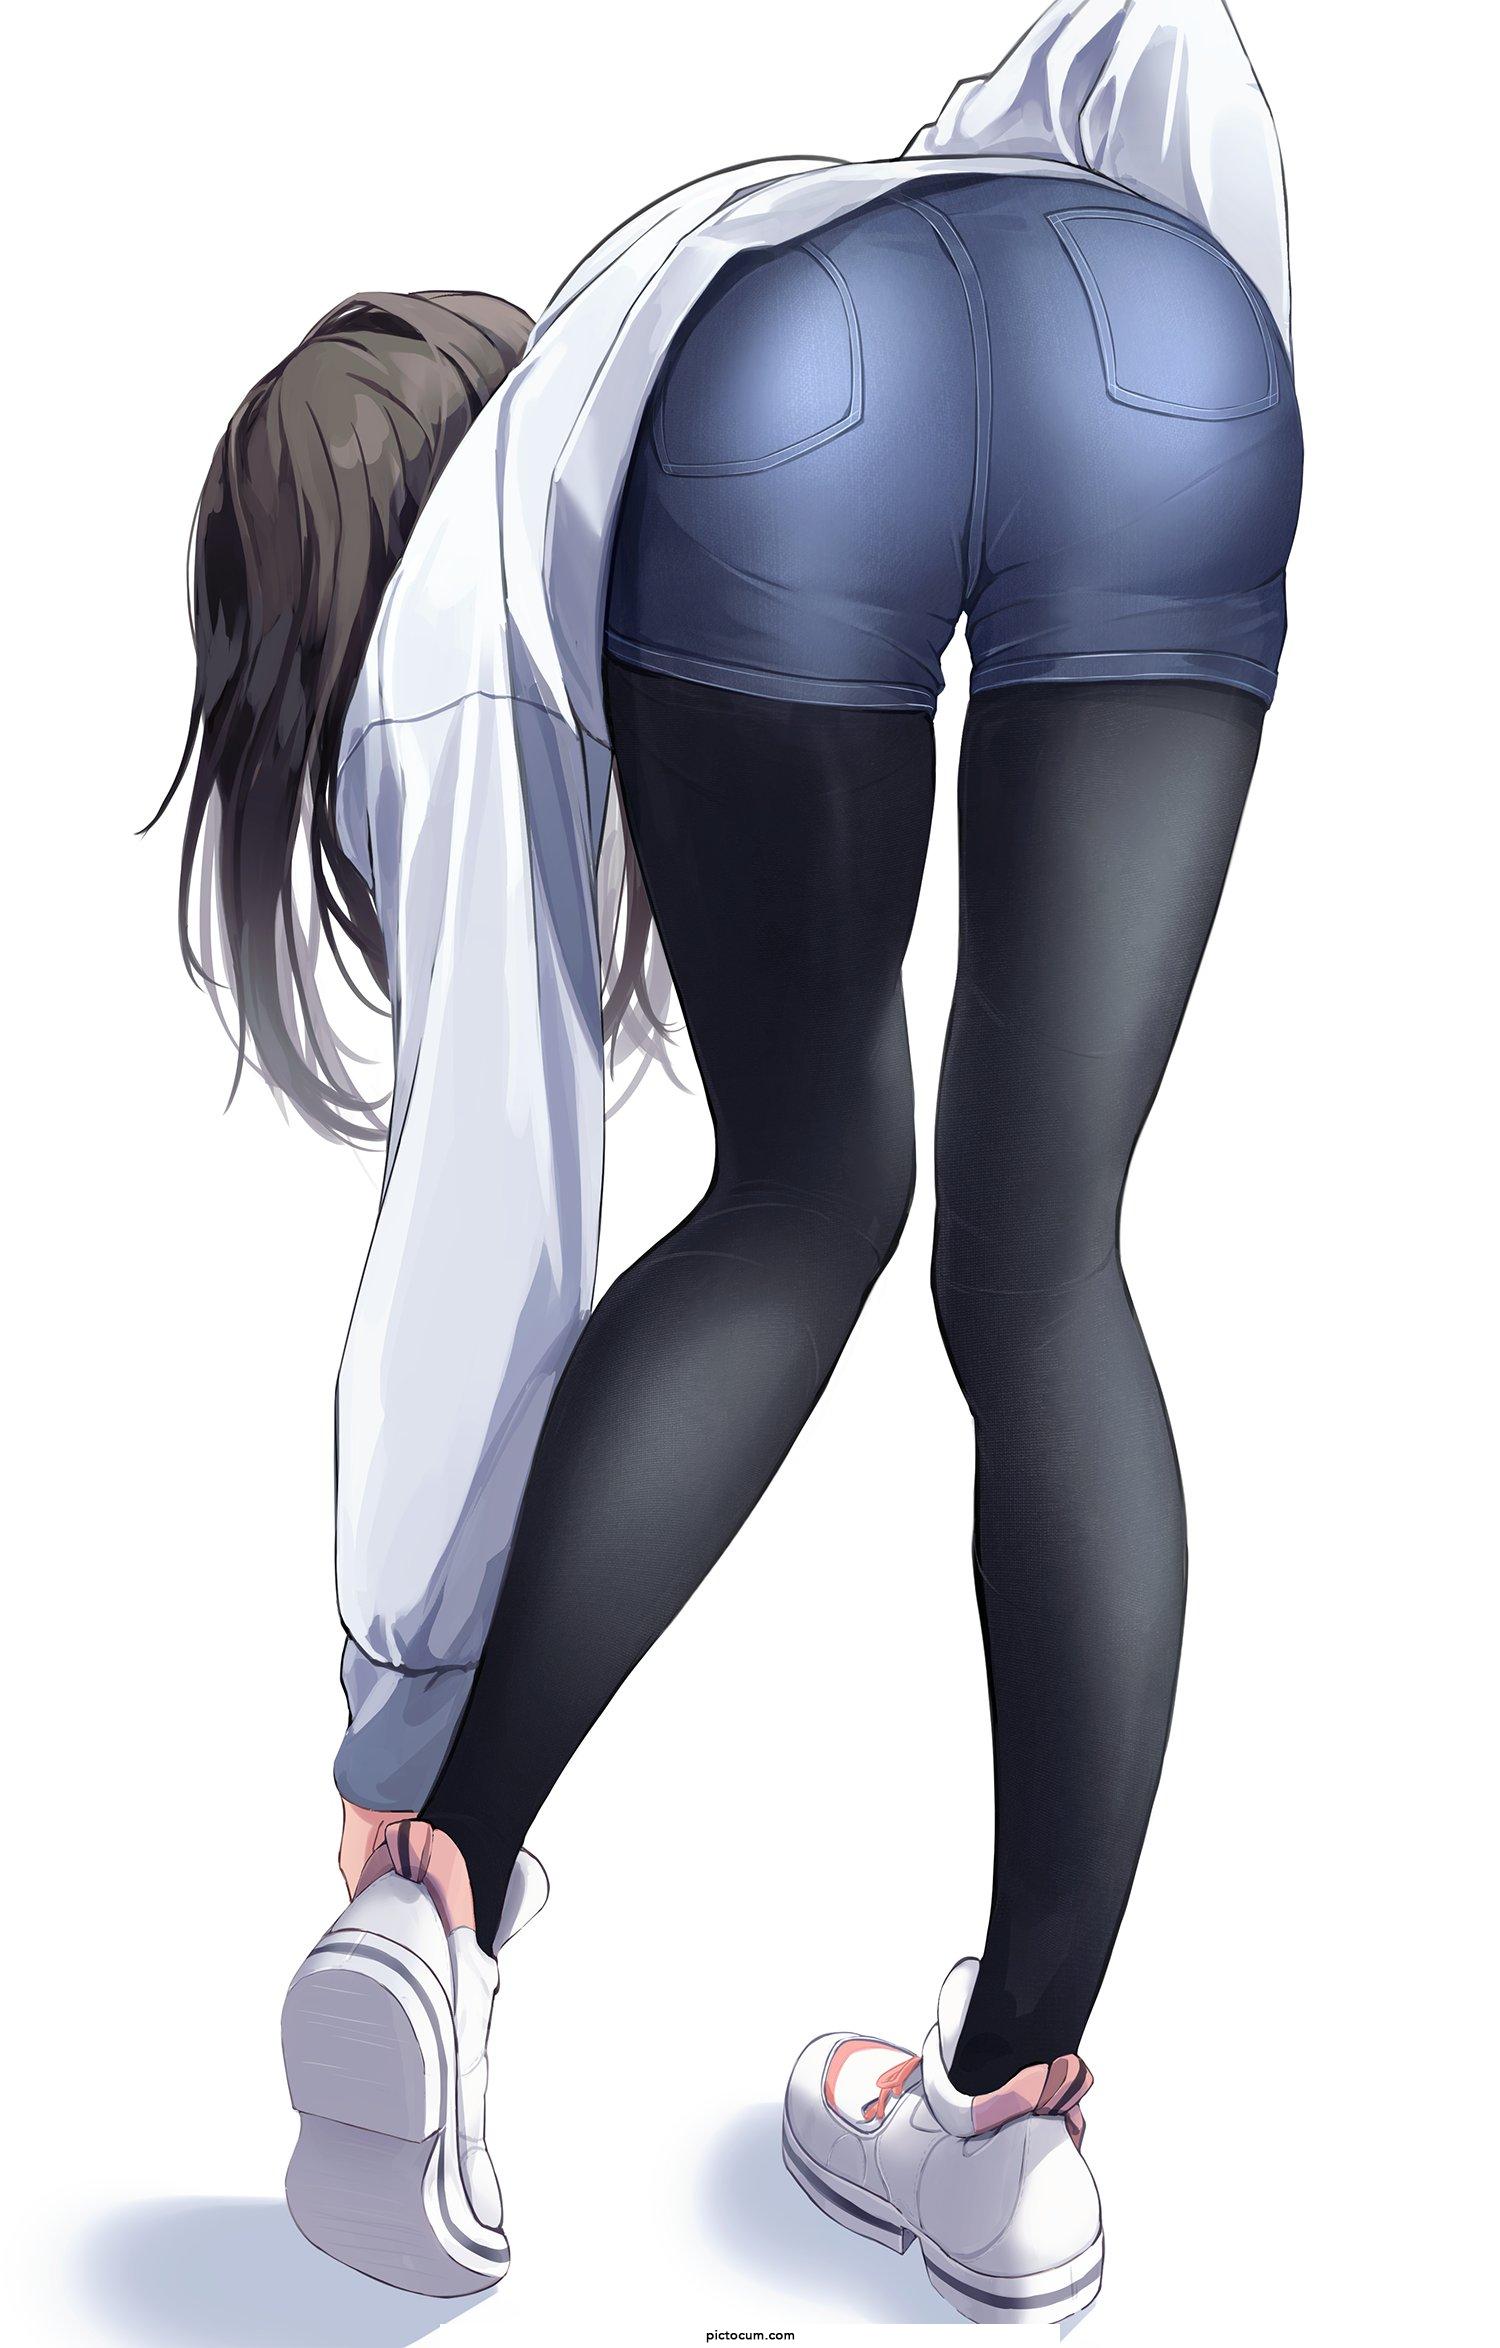 Shorts over tights